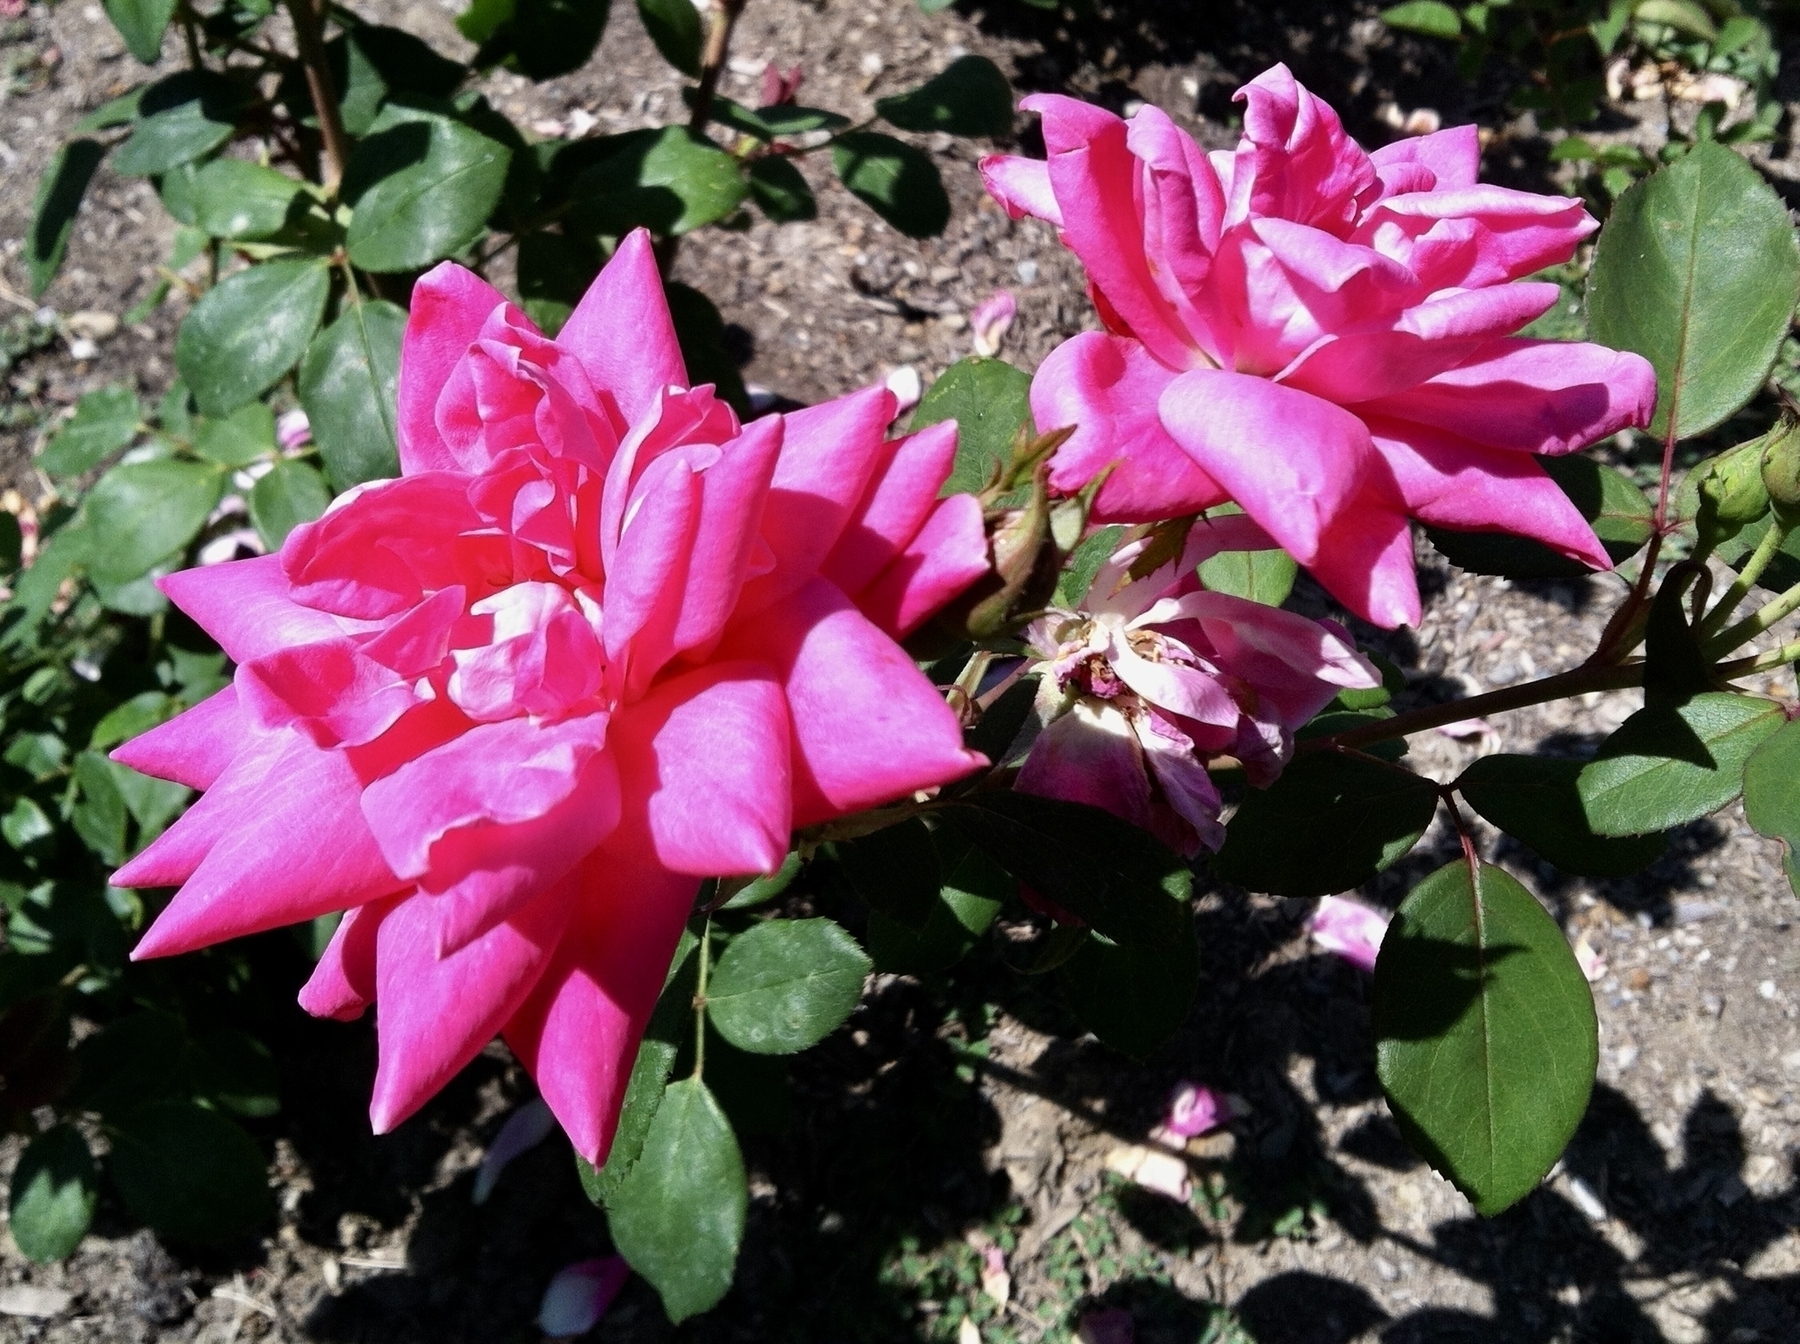 Two giant, bright pink roses with petals unfurled